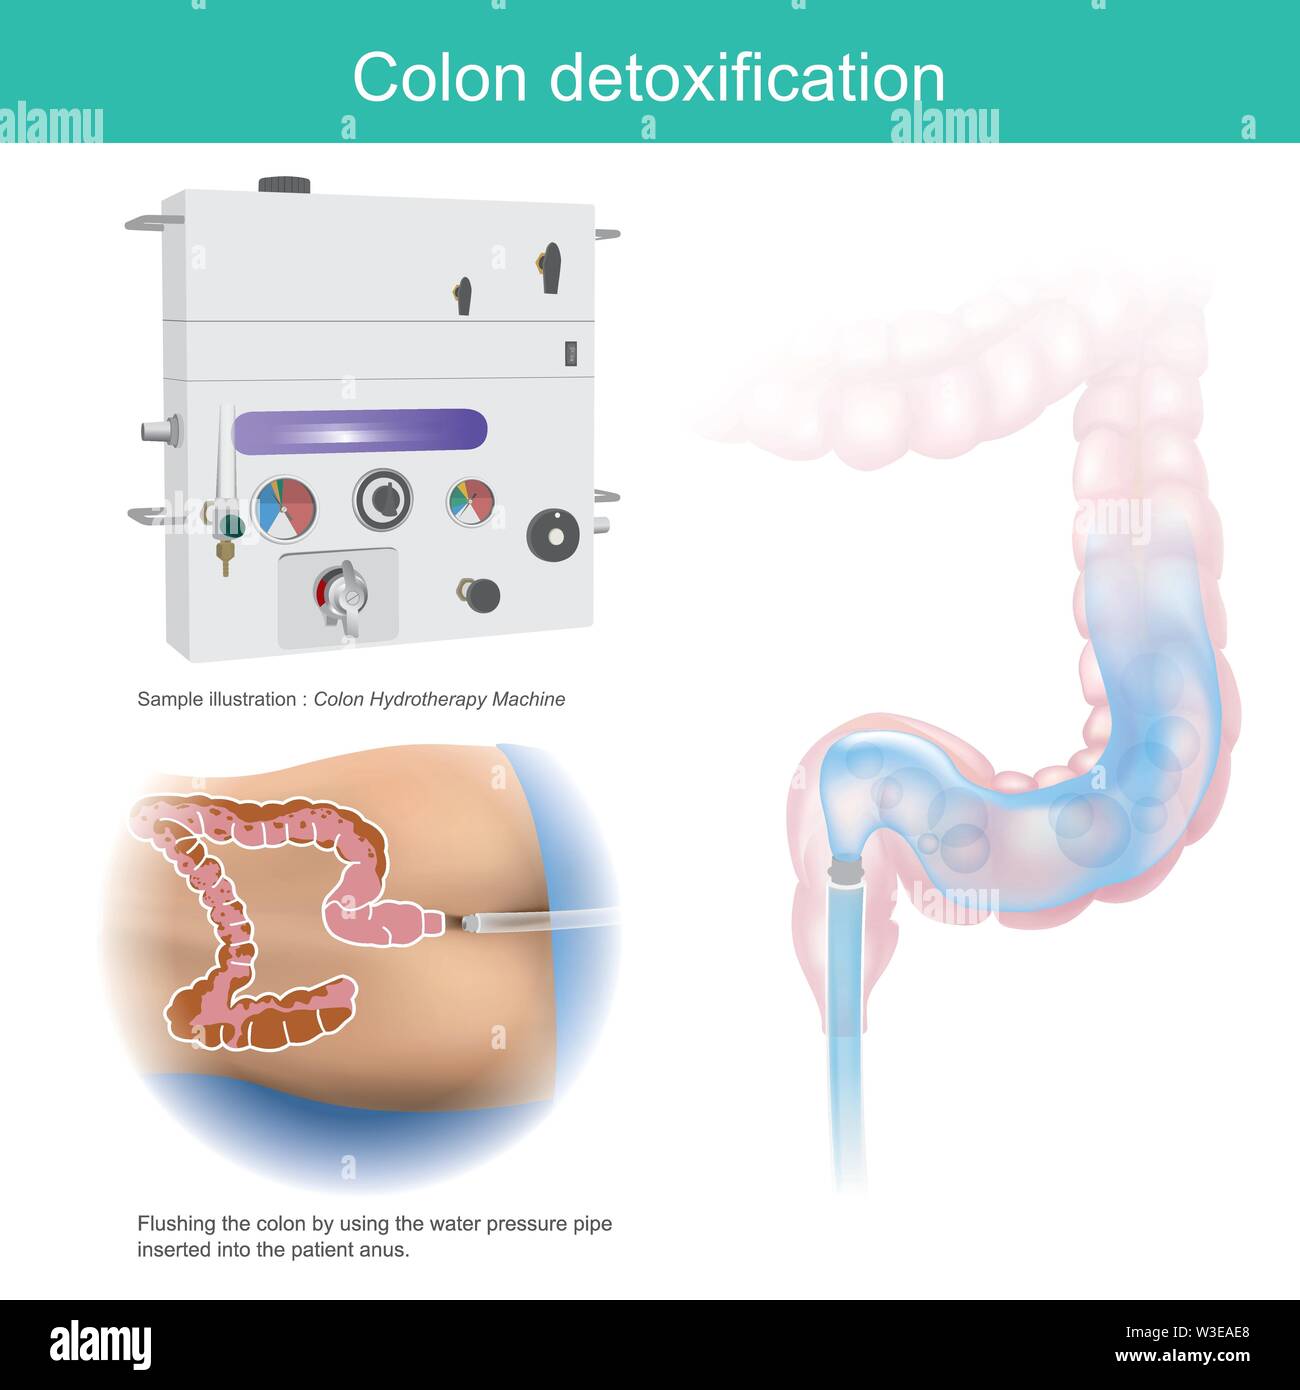 Colon detoxification. Sample illustration flushing the colon by using the water pressure pipe inserted into the patient anus. Stock Vector